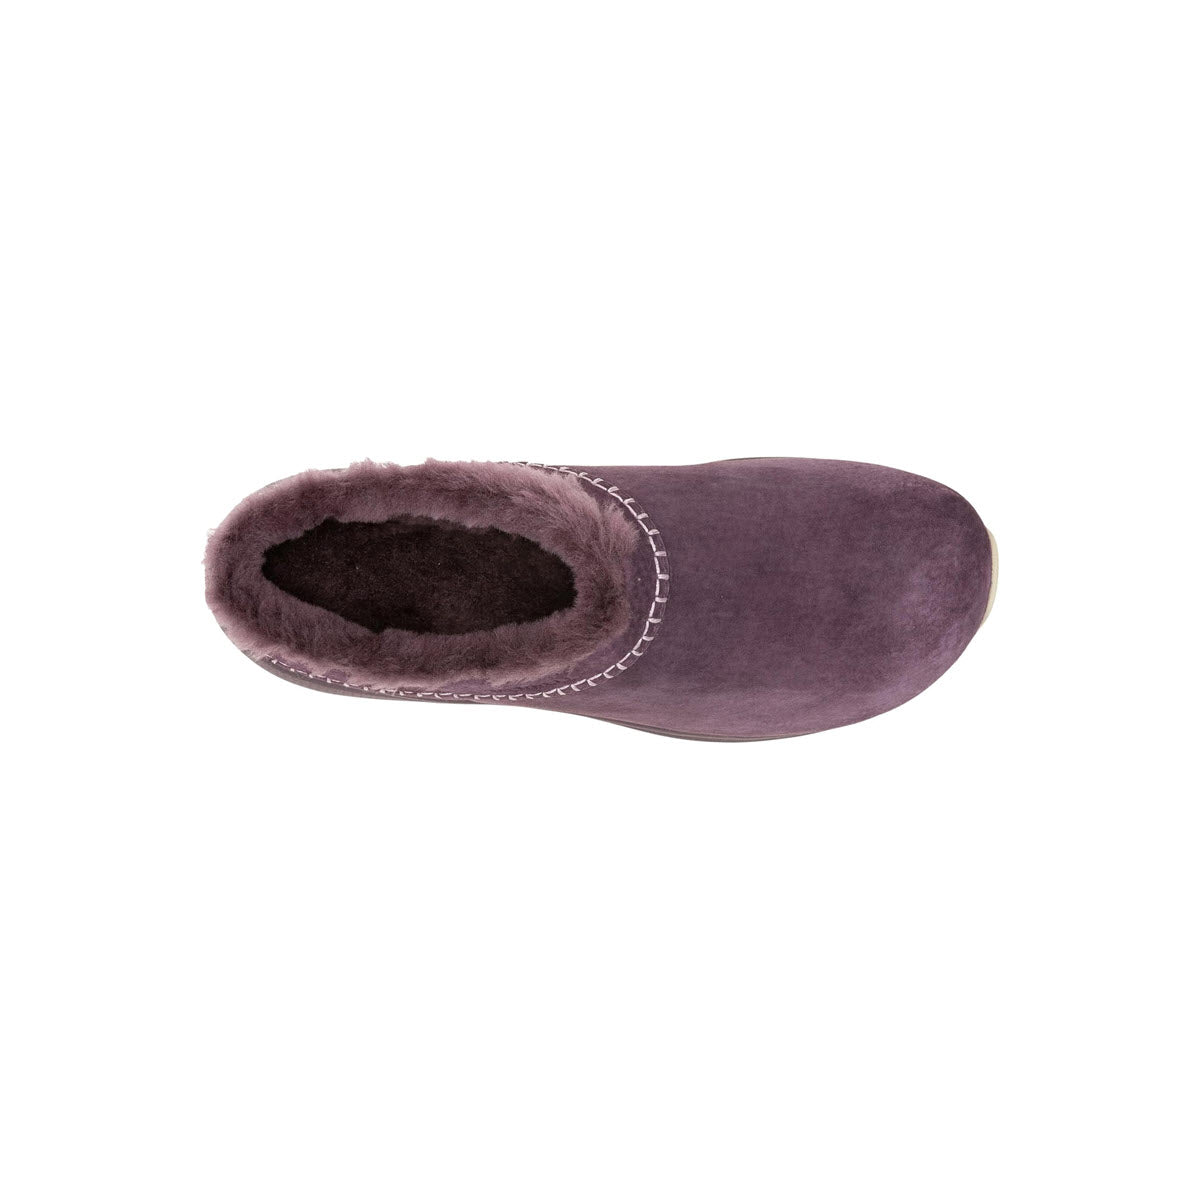 A single Merrell slipper with sheepskin lining and white stitching, isolated on a white background.